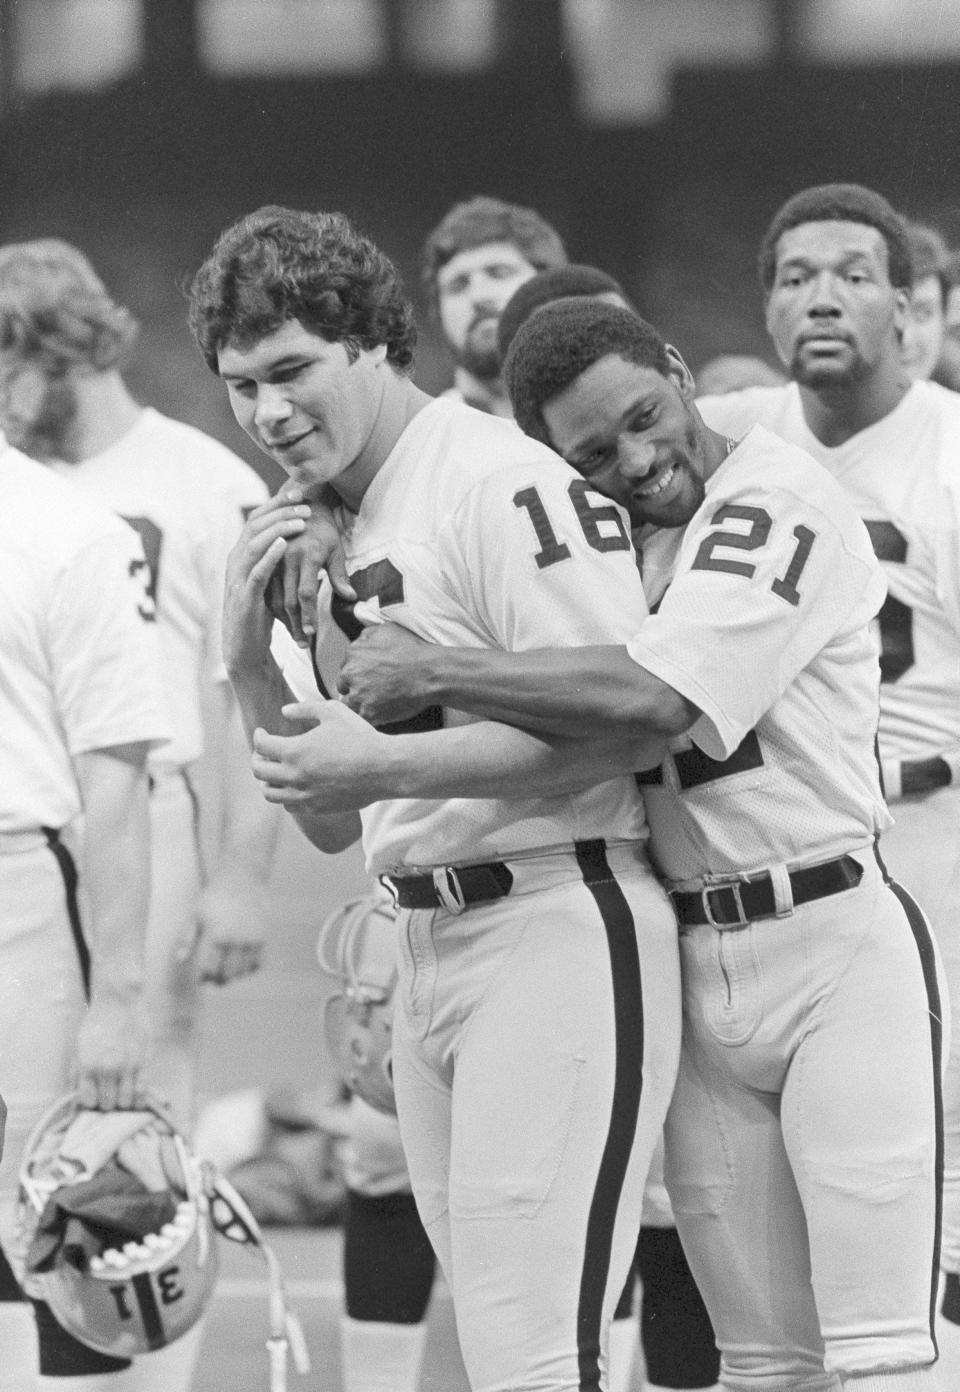 Oakland Raiders wide receiver Cliff Branch (21) hugs quarterback Jim Plunkett (16) as the Raiders lined up for a team picture before a workout in the Superdome in New Orleans., Jan. 21, 1981. (AP Photo/Paul Sakuma, File)